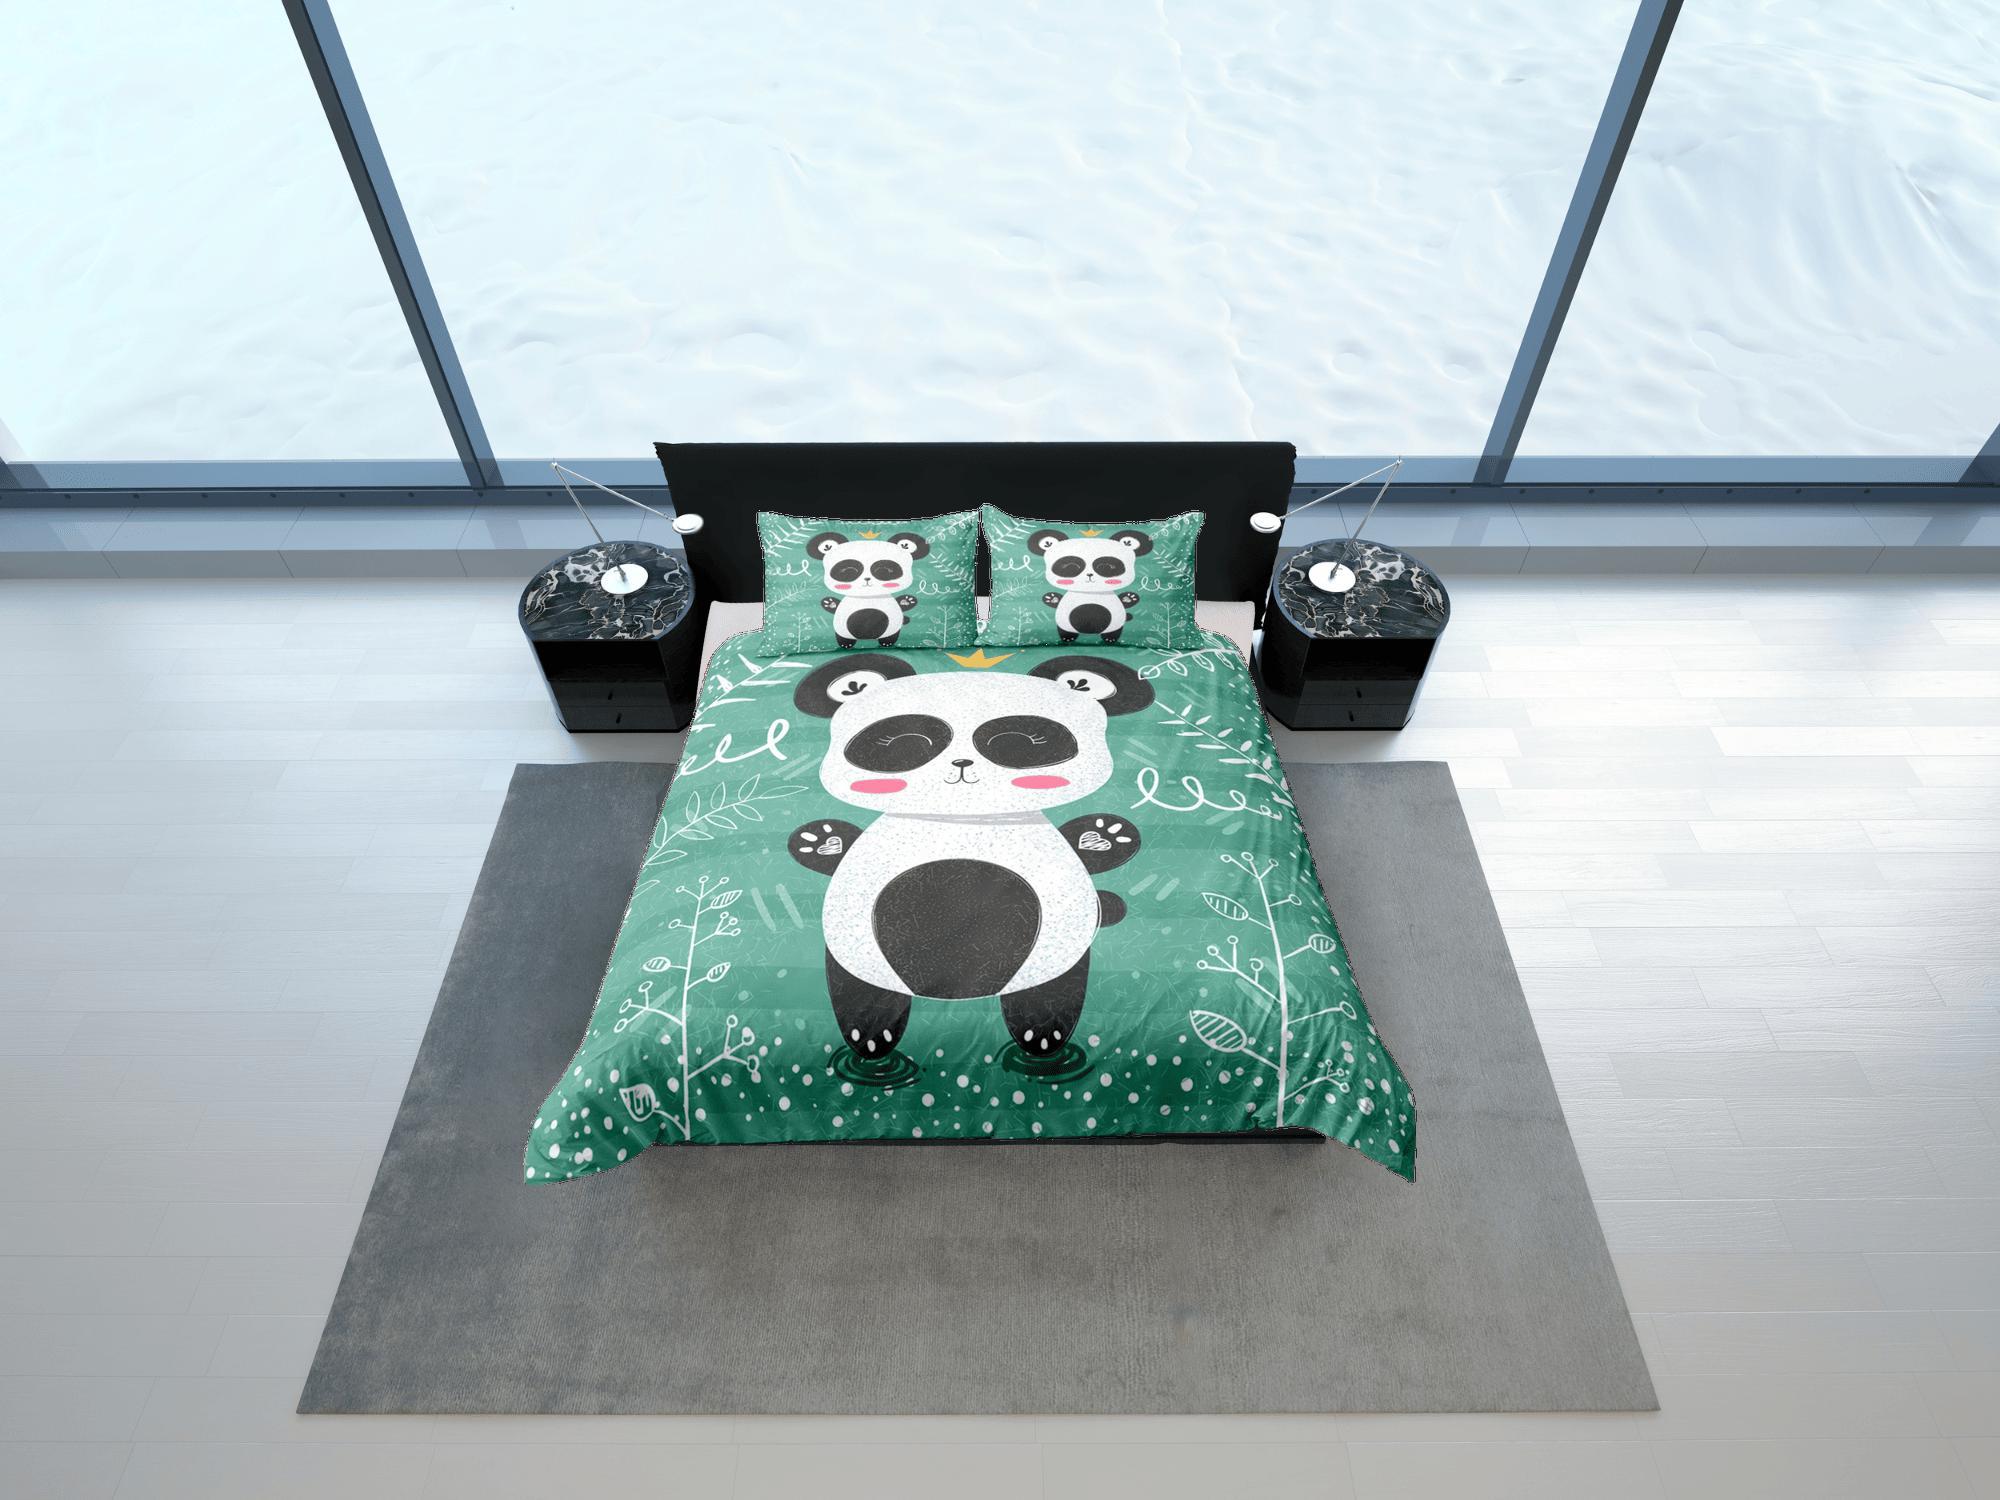 daintyduvet Cute Happy Panda Duvet Cover Set Colorful Bedspread, Kids Bedding with Pillowcase